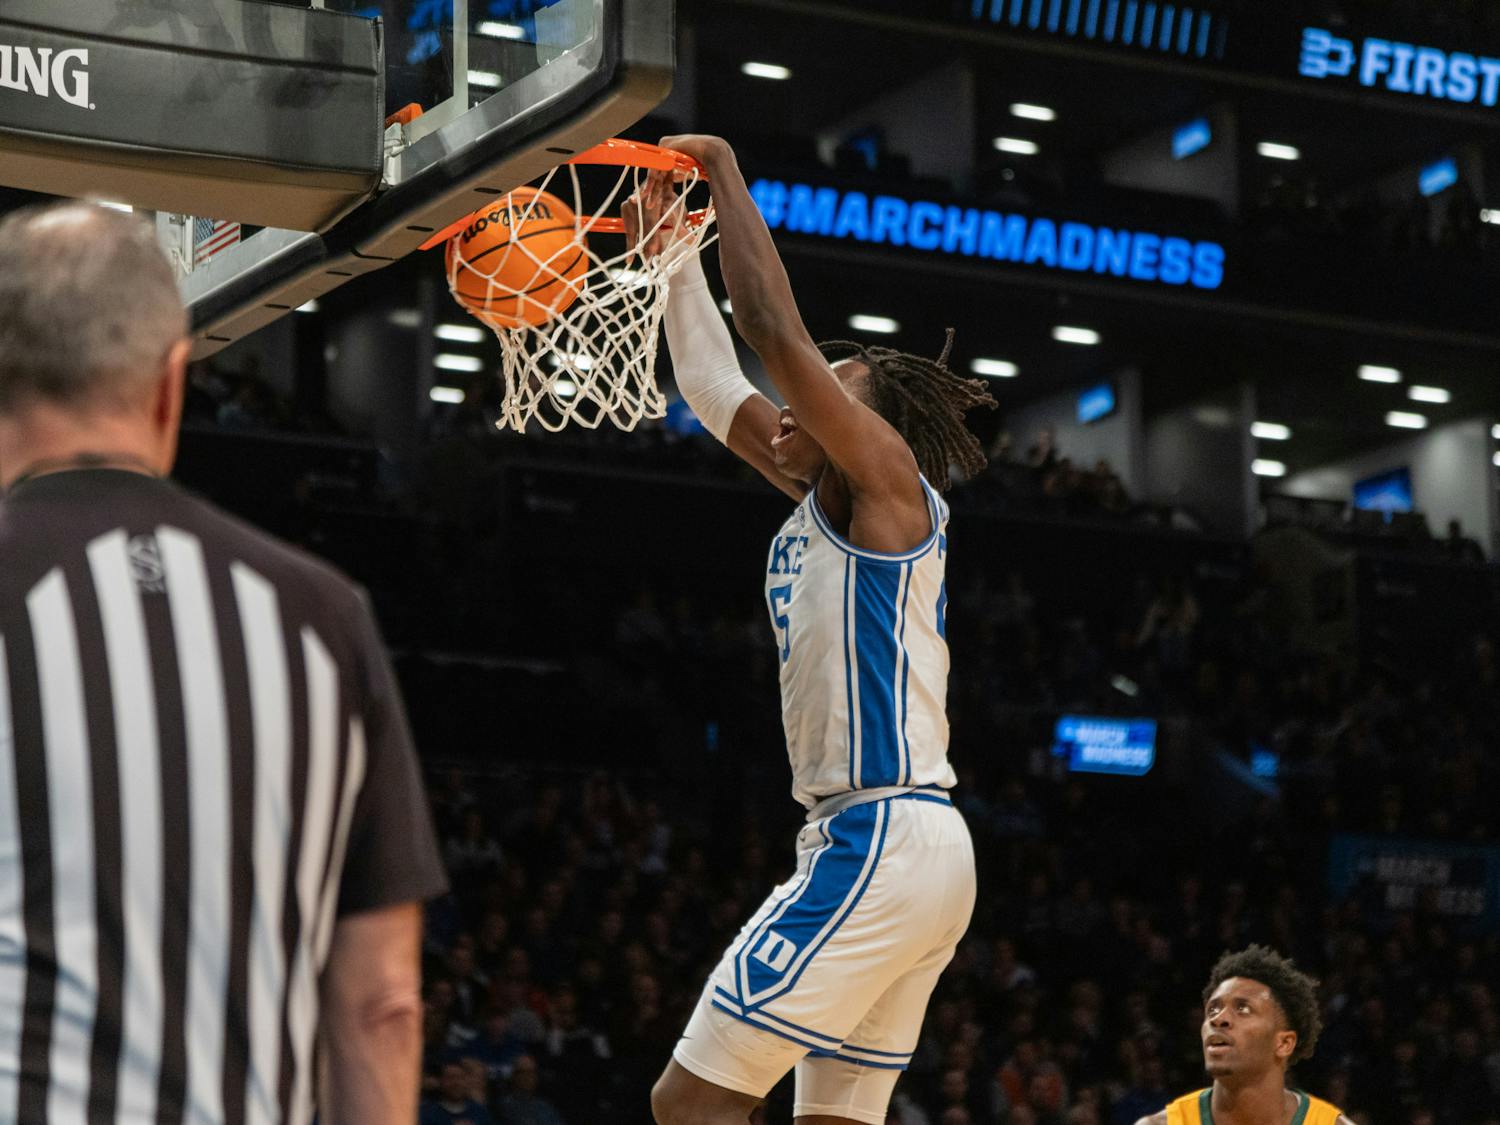 Sophomore forward Mark Mitchell rises for a dunk in Duke's first-round NCAA tournament game against Vermont.